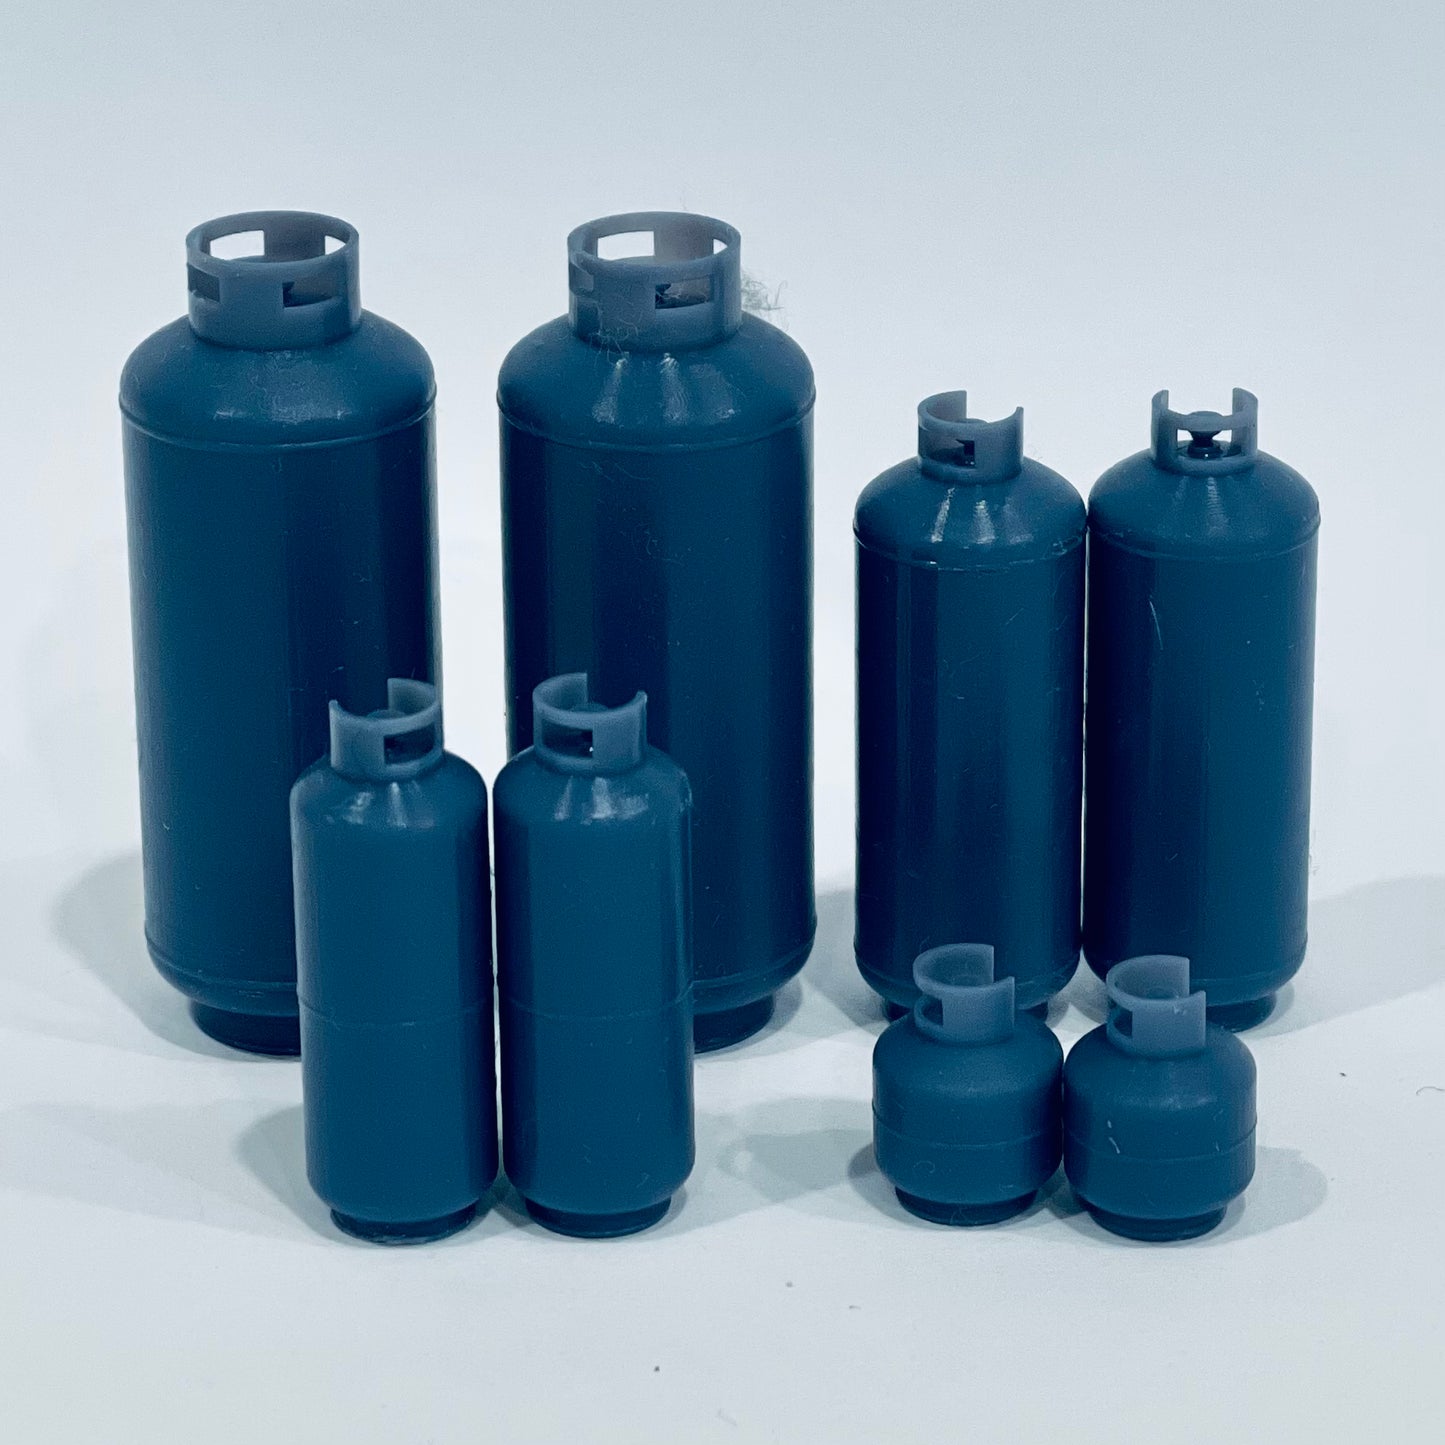 Gas Bottles - Assorted Sizes - 1/35